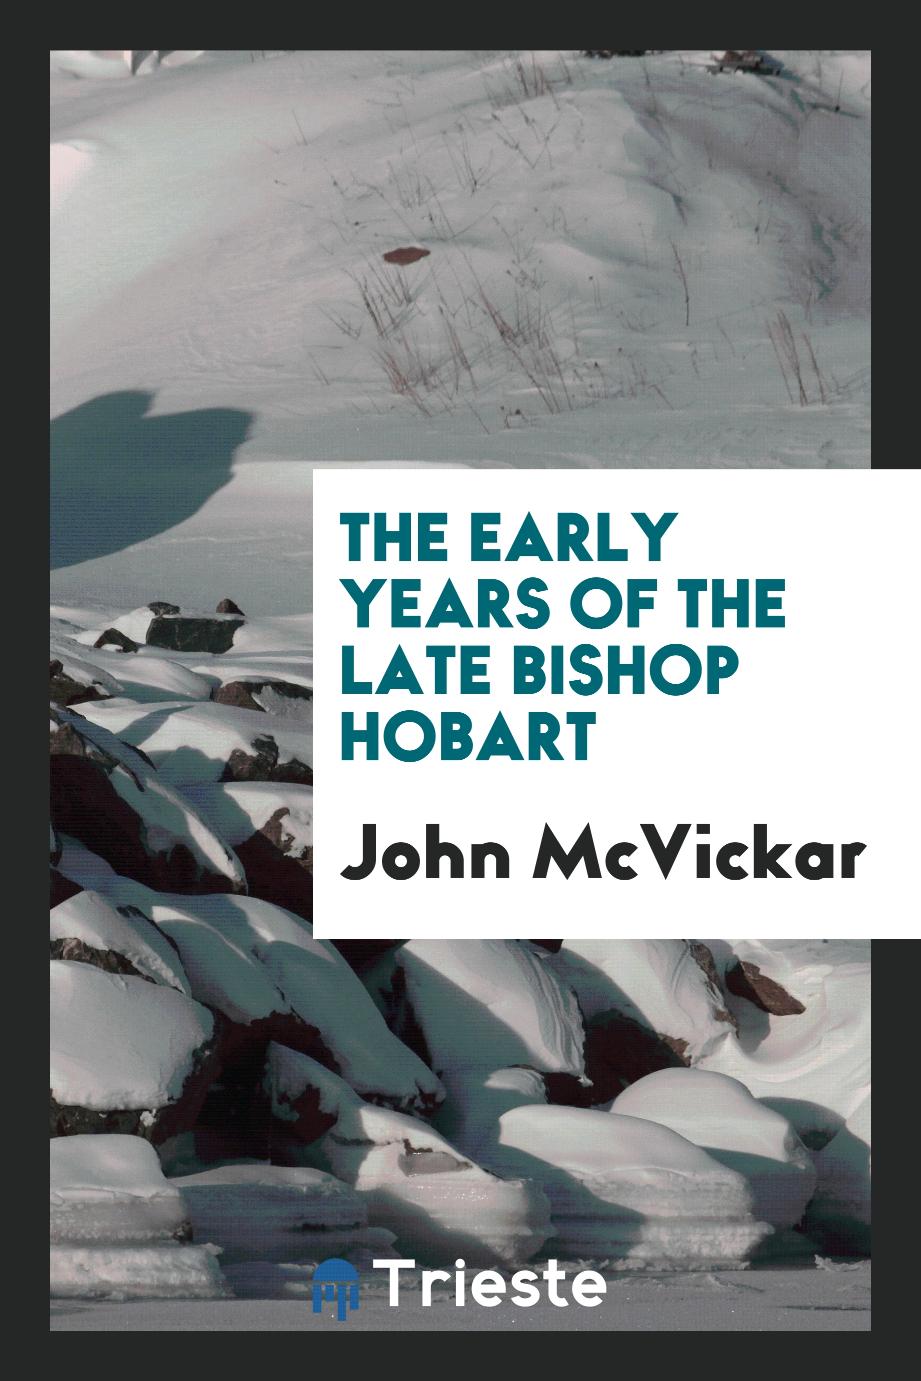 The early years of the late Bishop Hobart